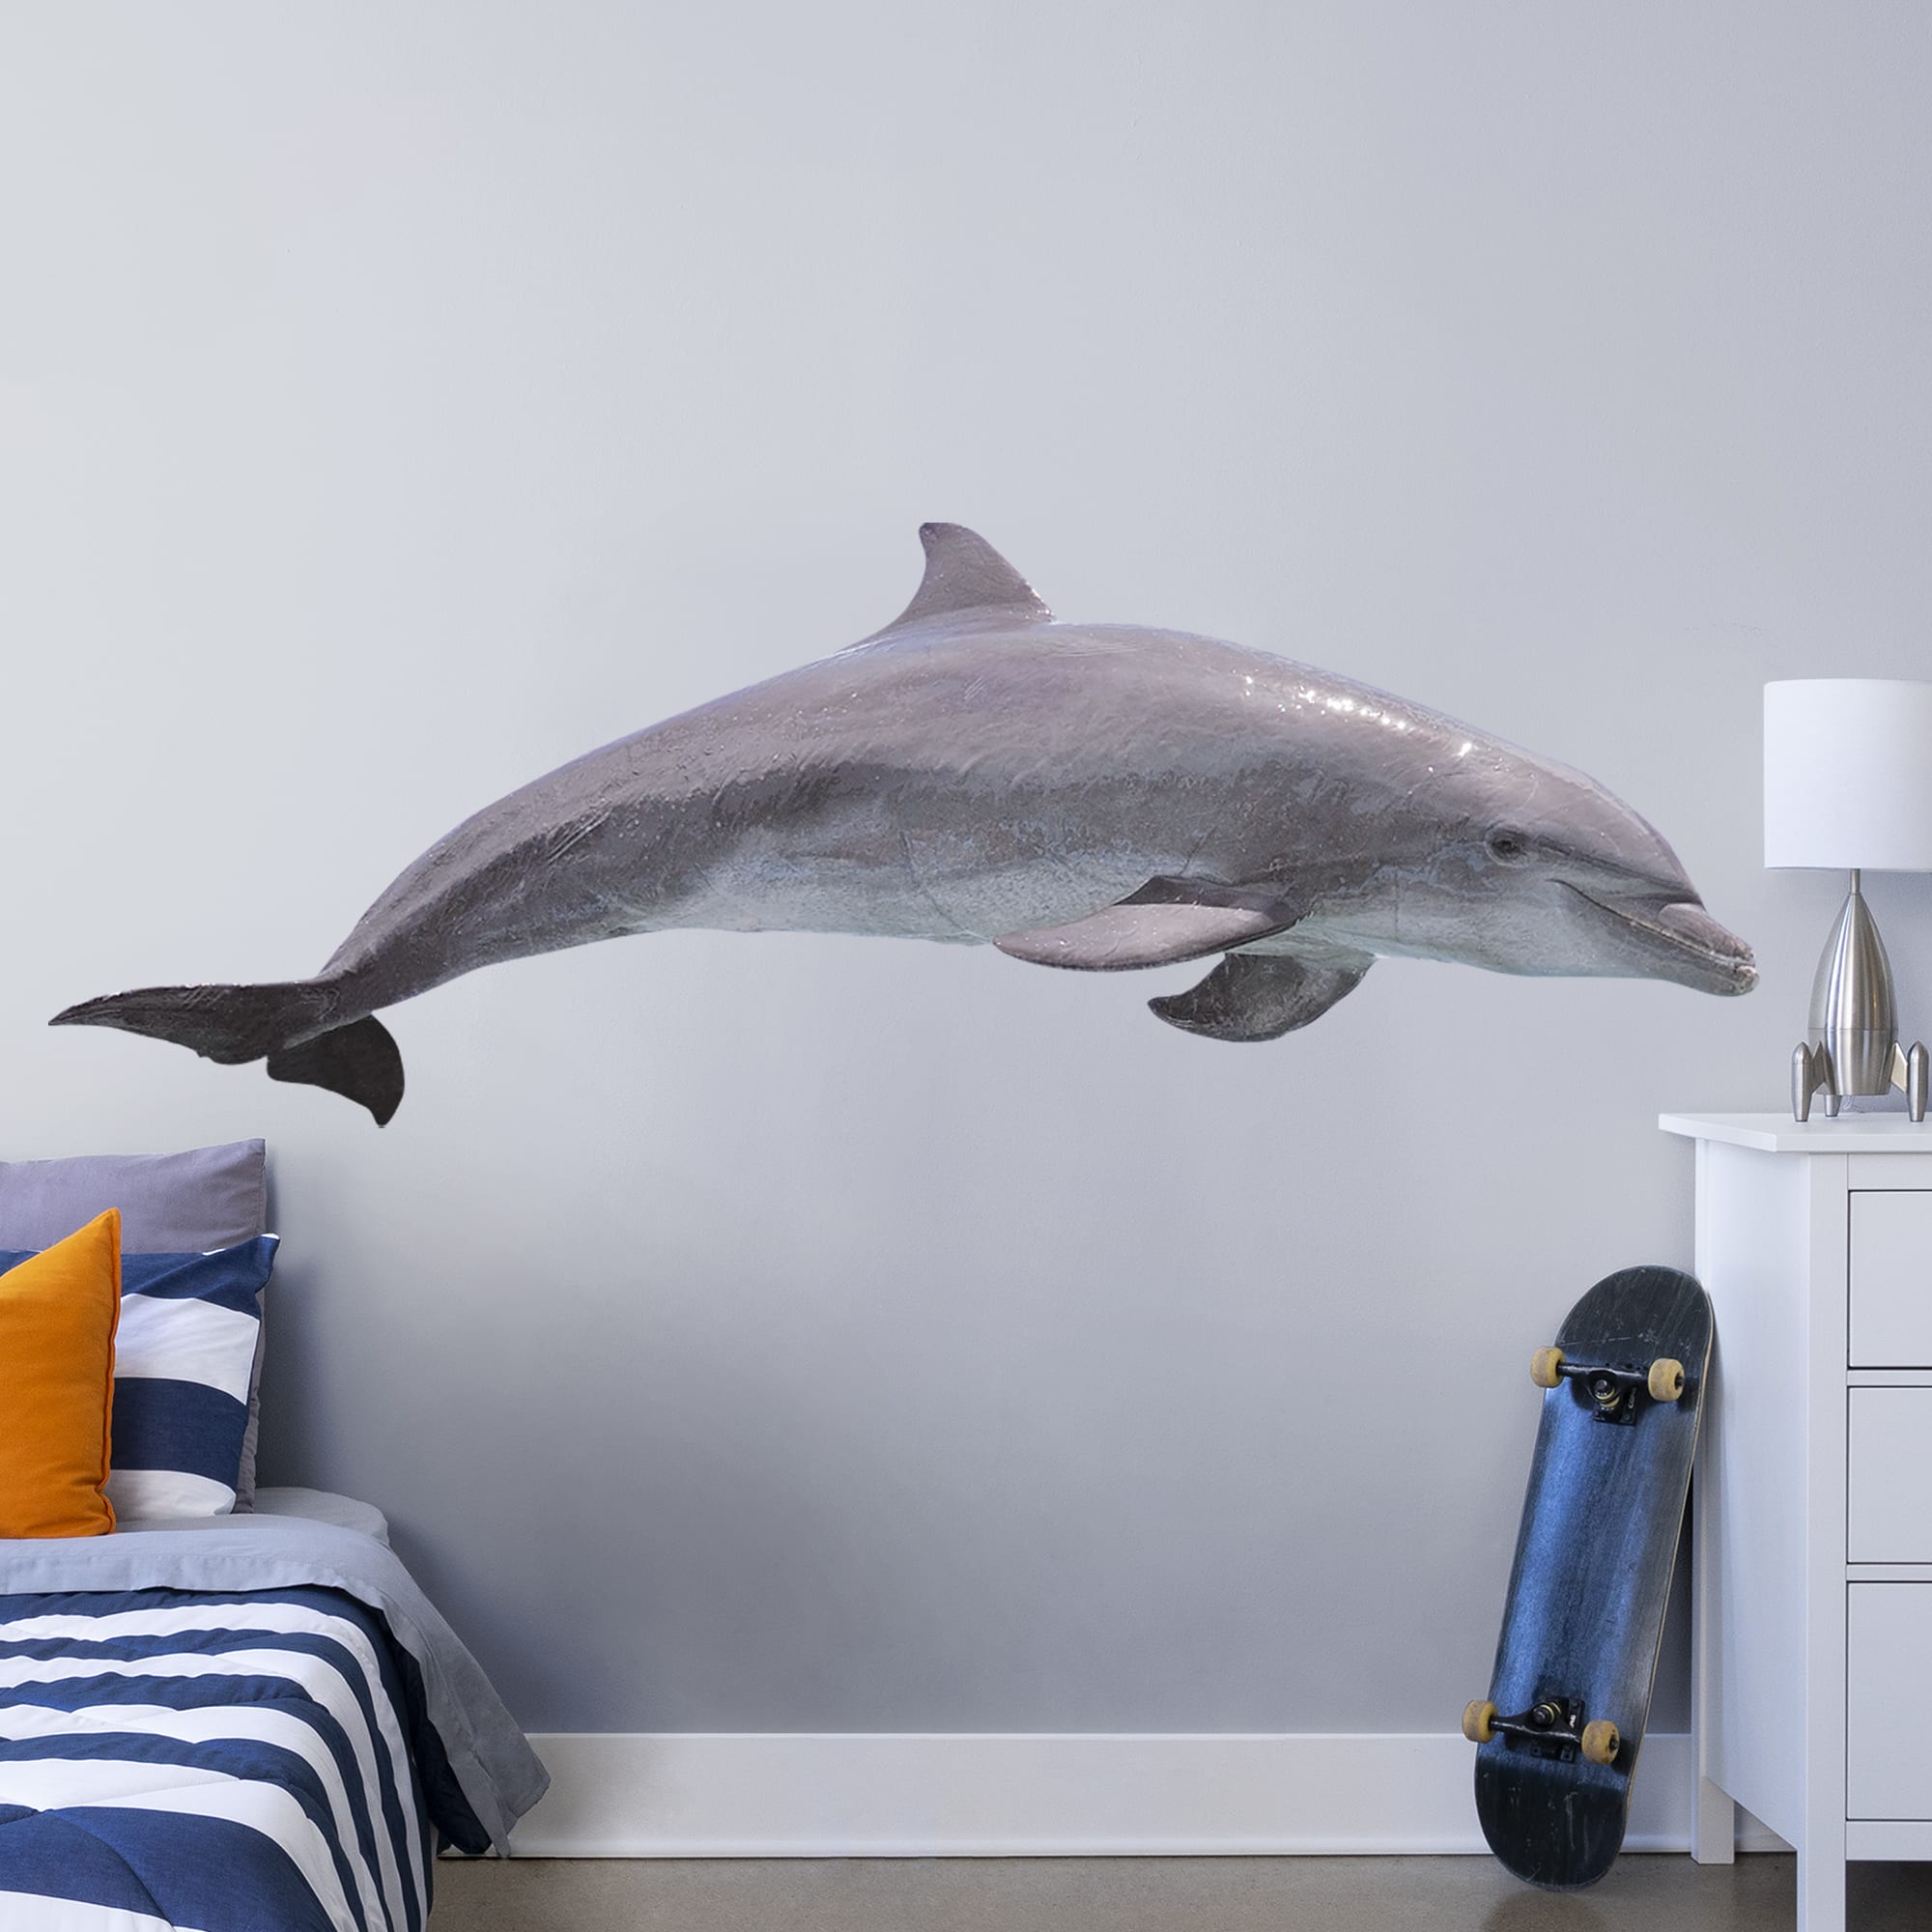 Bottle Nose Dolphin - Removable Vinyl Decal Huge Animal + 2 Decals (89"W x 32"H) by Fathead